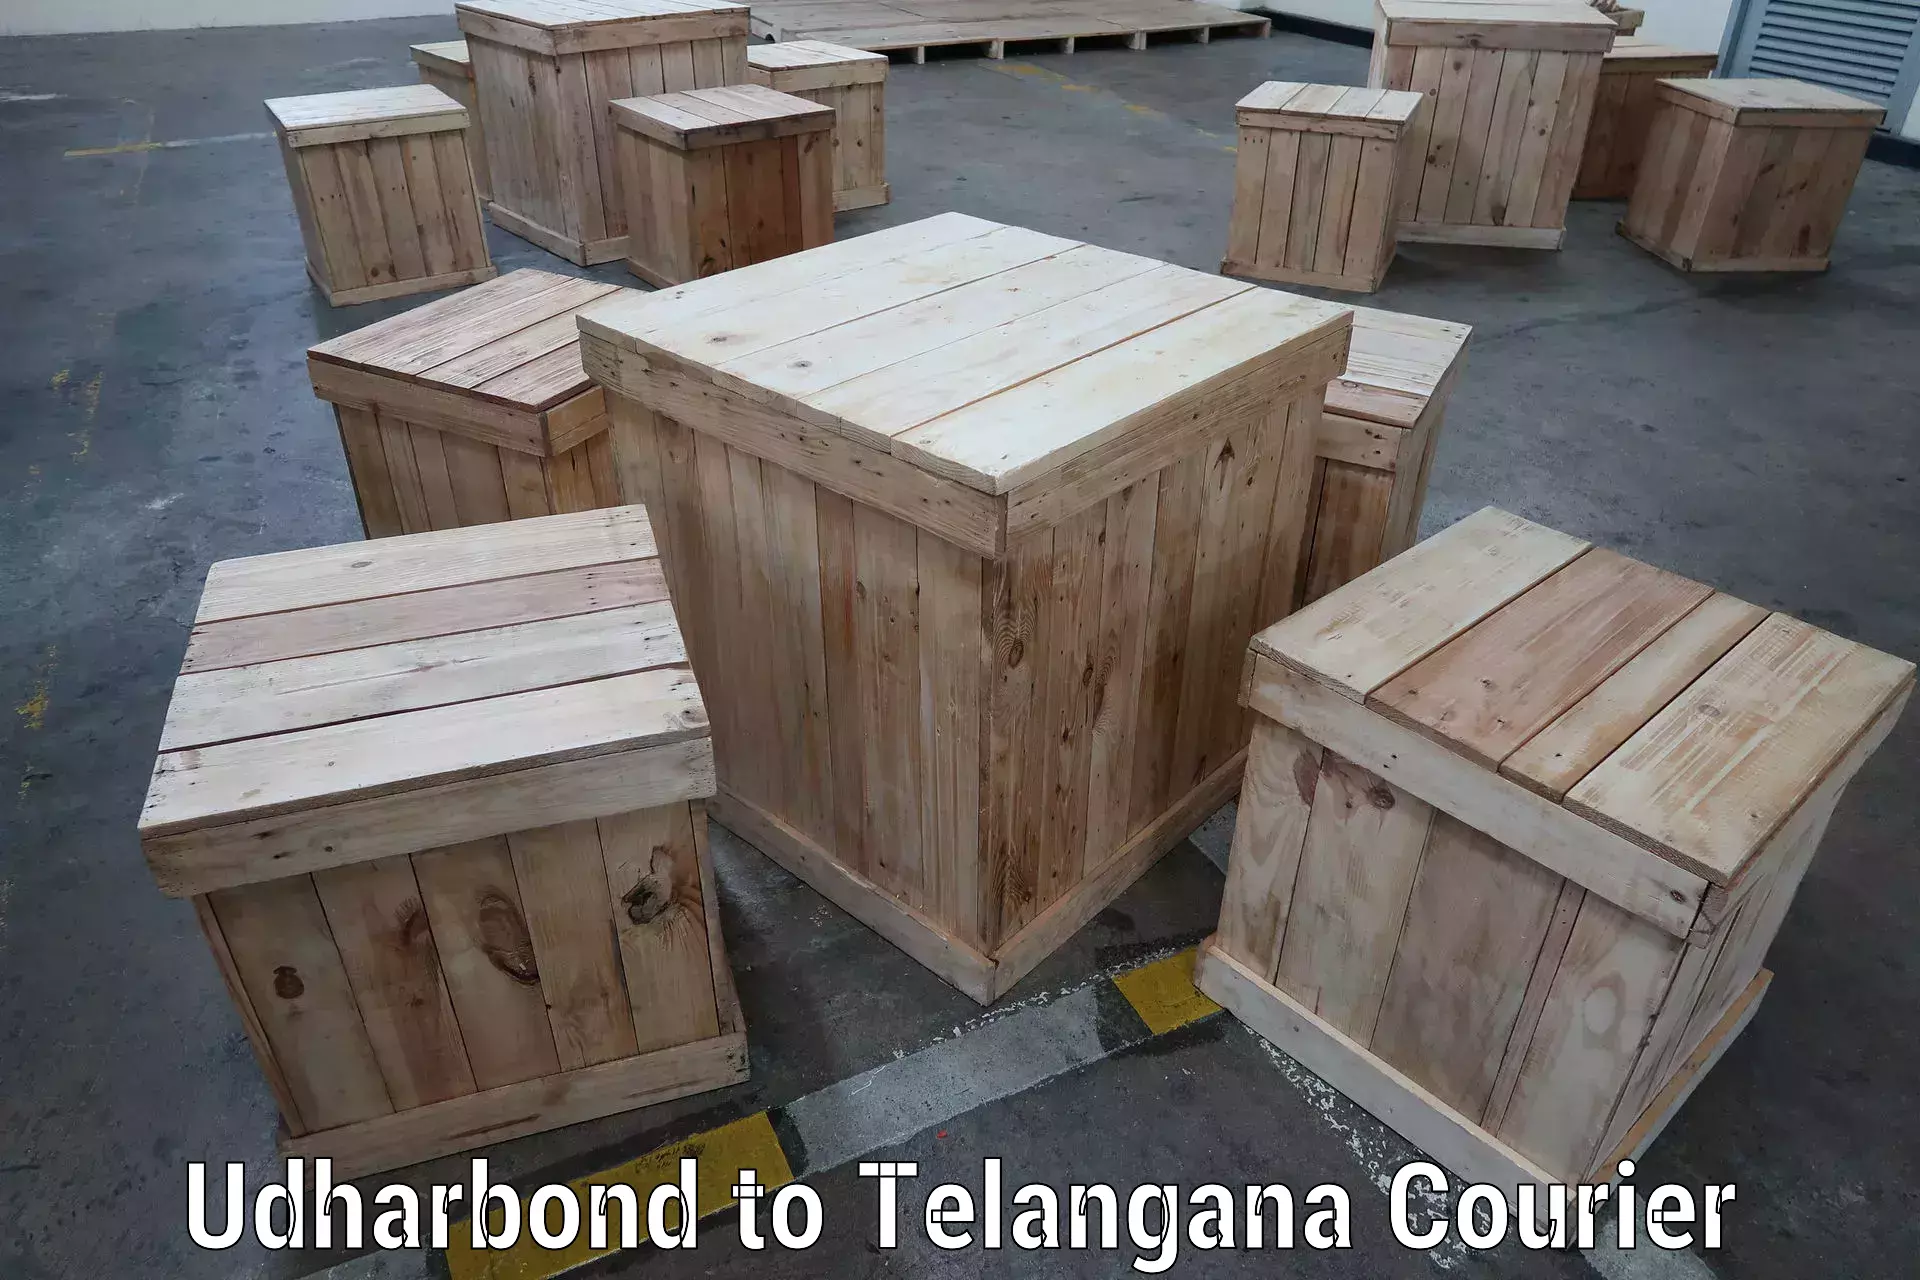 Courier dispatch services in Udharbond to Telangana